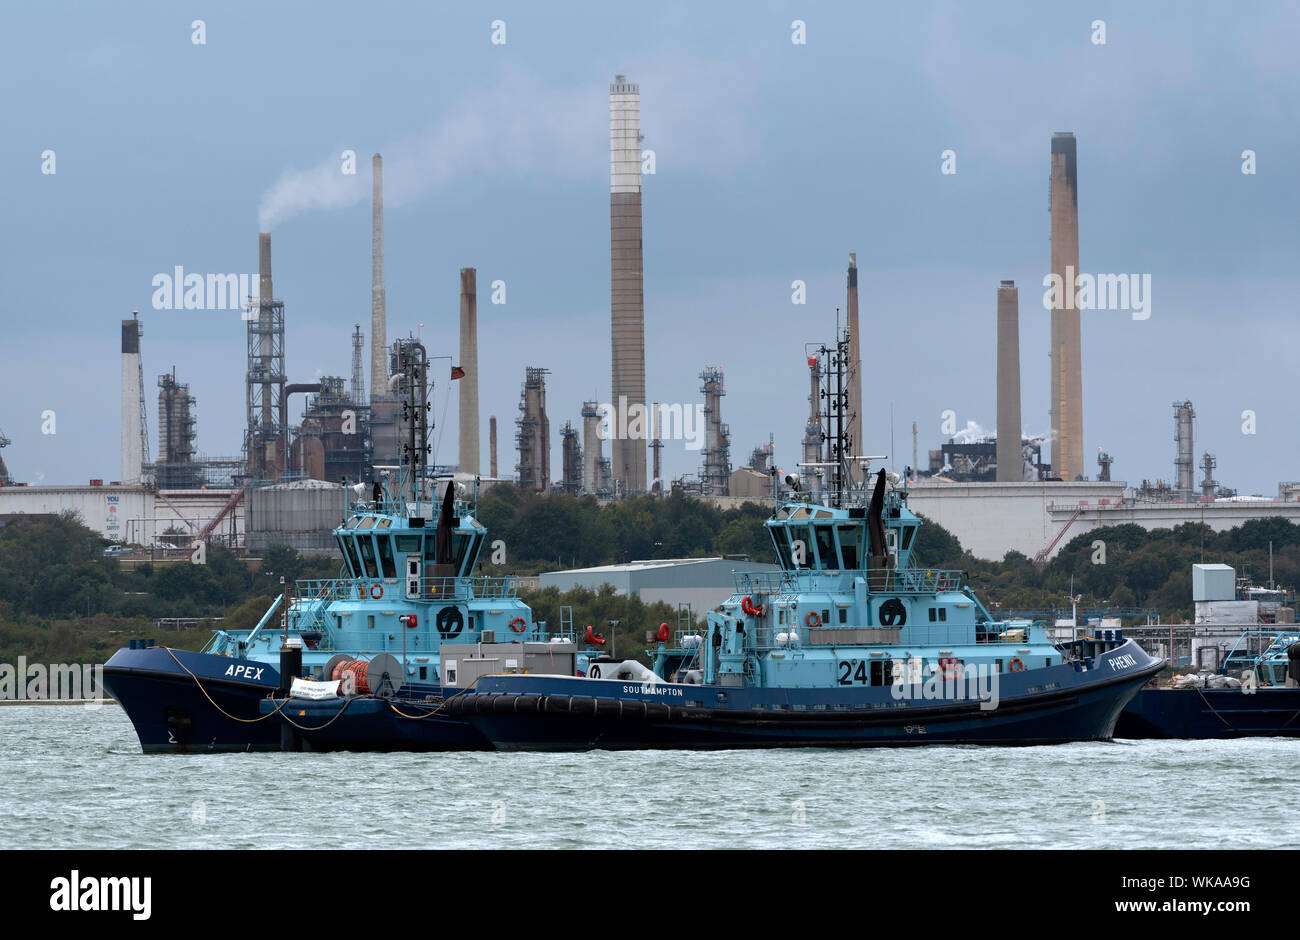 Fawley Marine, Southampton Water, England, UK. Apex and Phenix two Voith tractor tugs powered by Rolls Royce engines, alongside Fawley Marine refinery Stock Photo